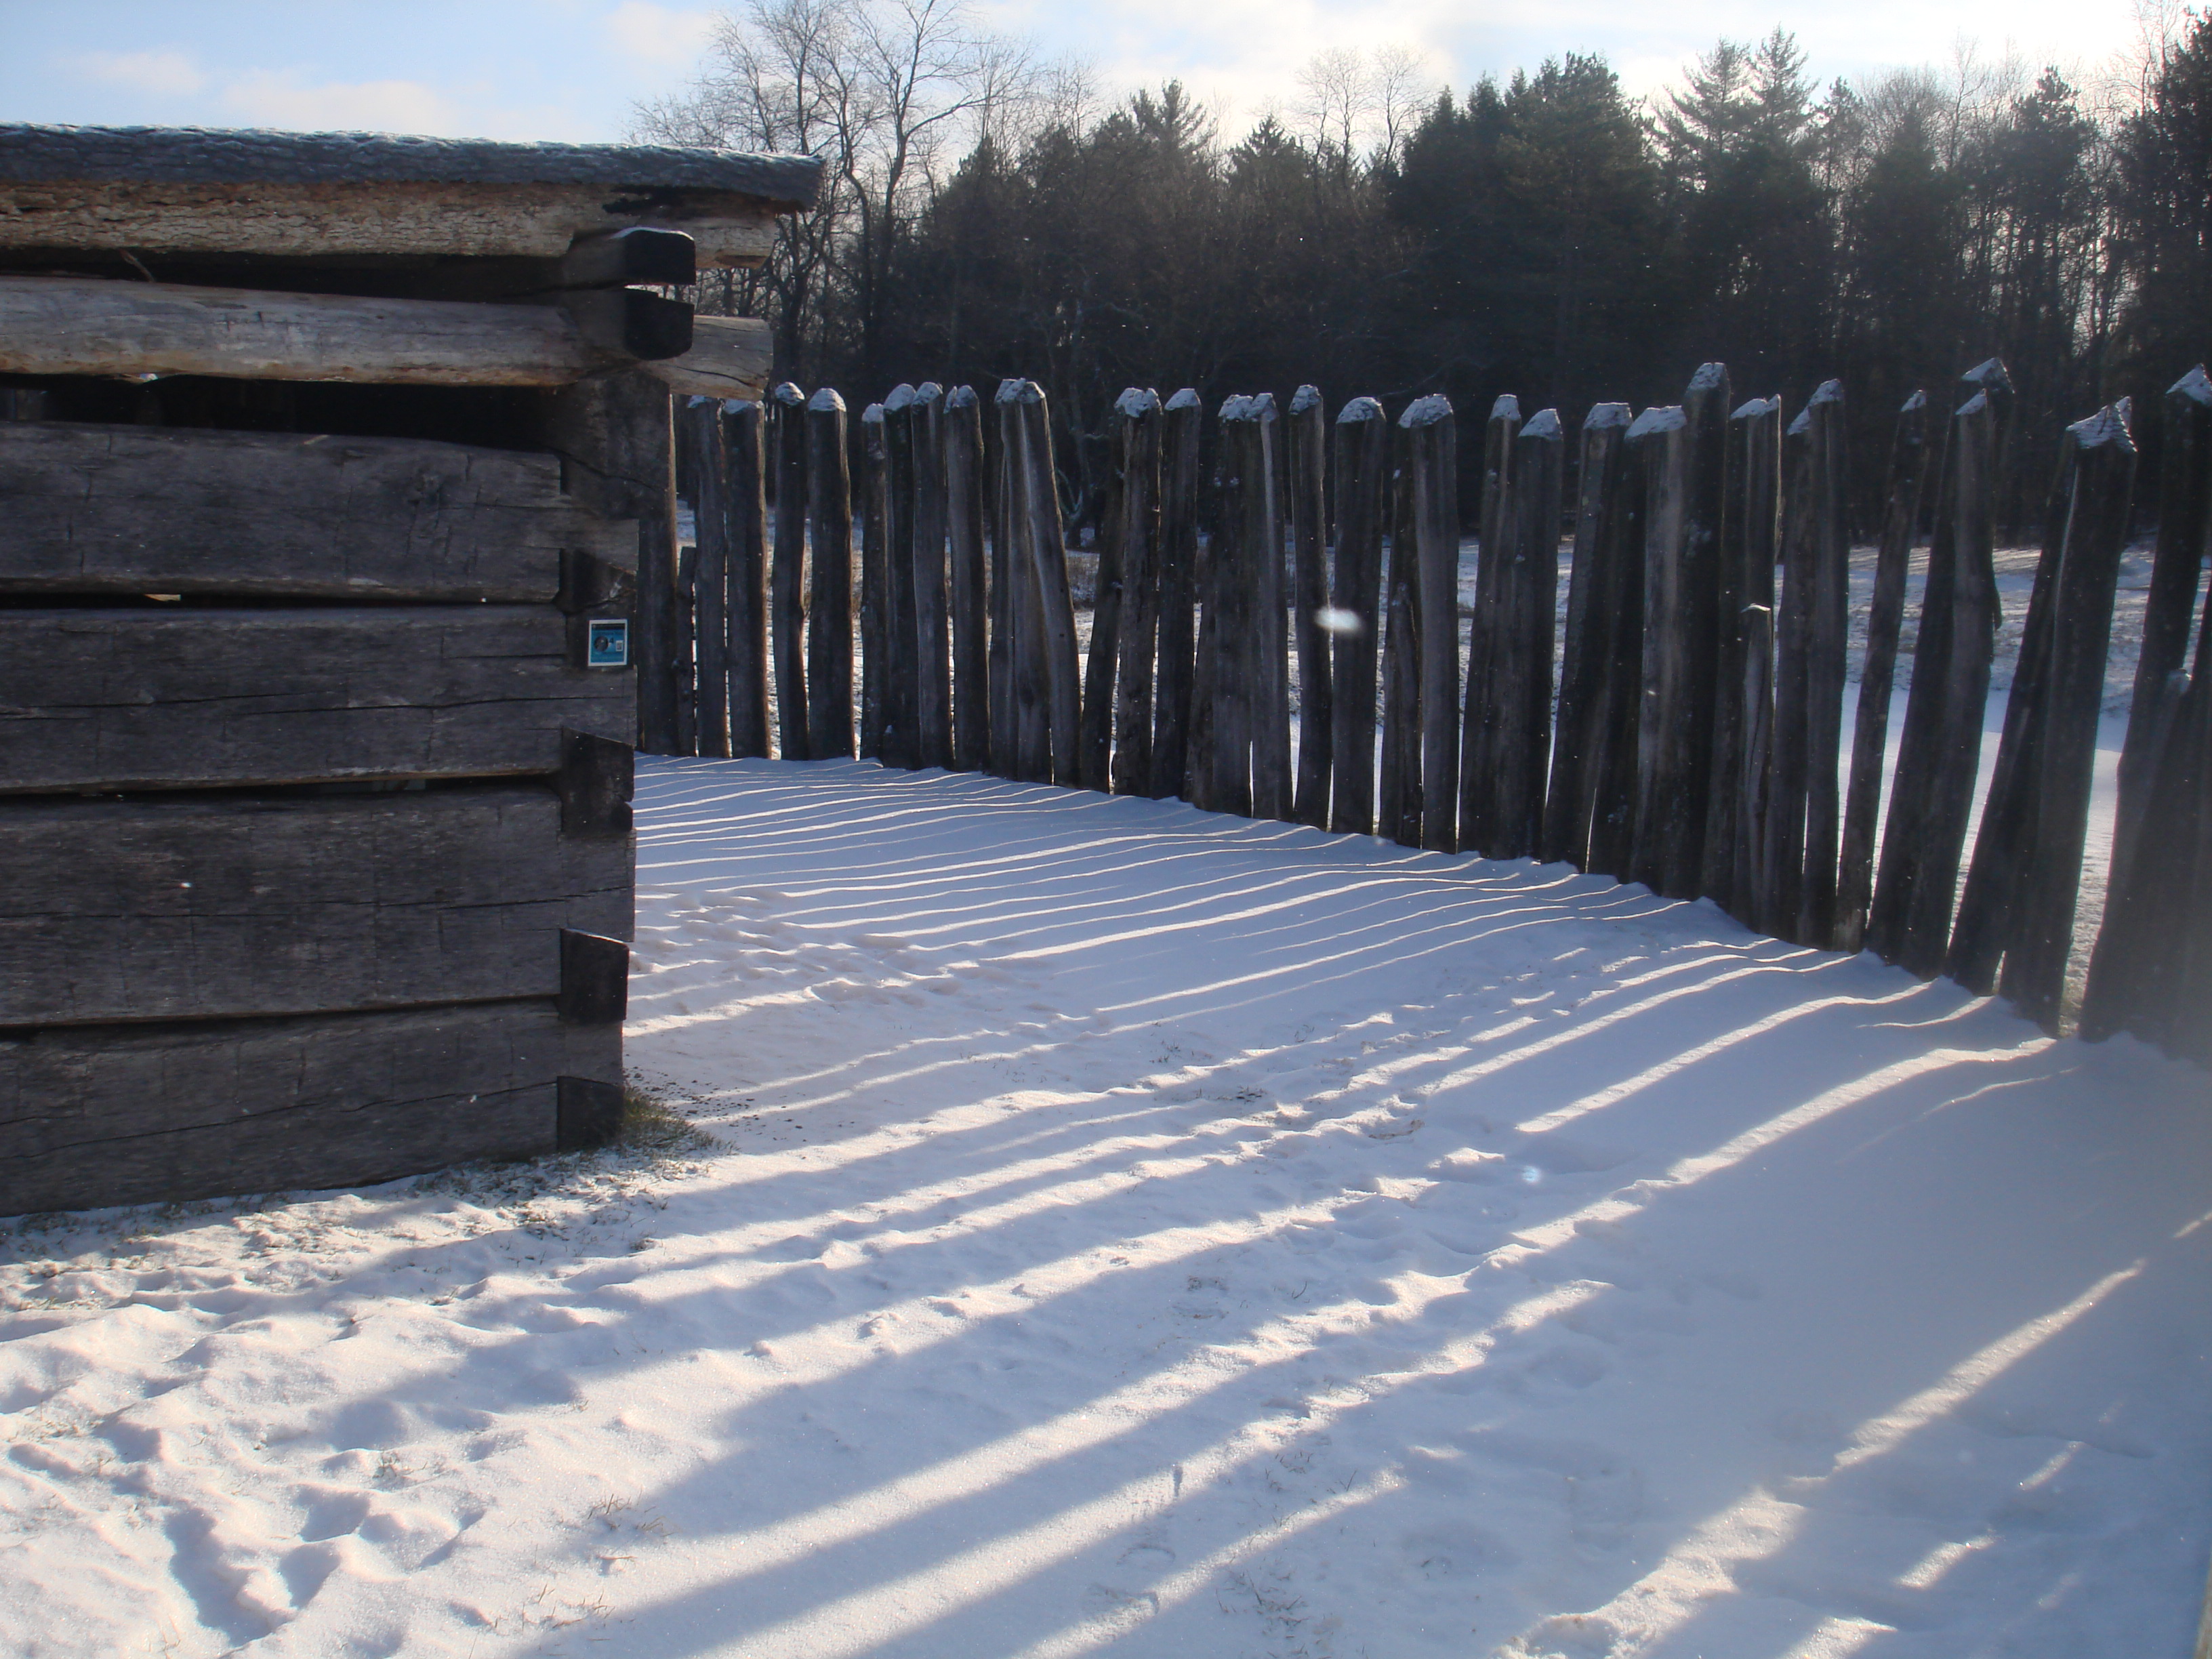 cabin and stockade casting shadows on the snow